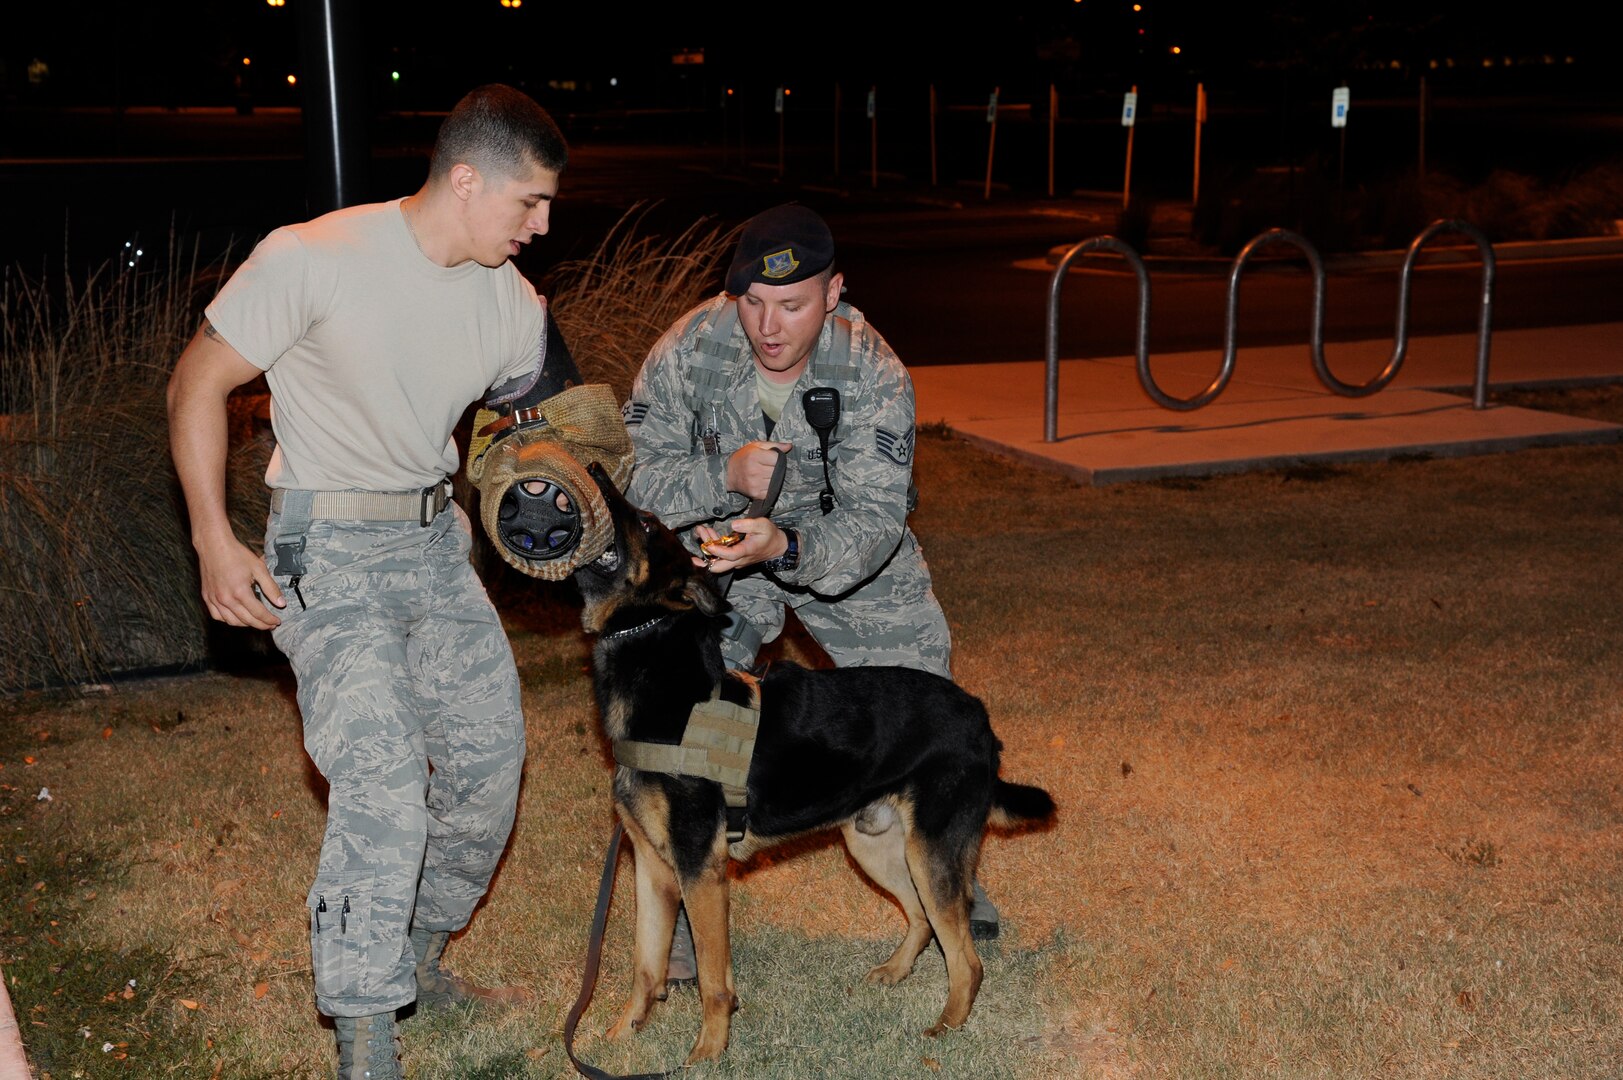 Staff Sgt. Edward Wallace, 902nd Security Forces Squadron military working dog handler, commands his dog Troy, to release his bite on Airman 1st Class Joshua Royer, 902nd SFS installation patrolman, during training on Joint Base San Antonio-Randolph, Texas, June 22.  (U.S. Air Force Photo by Don Lindsey)